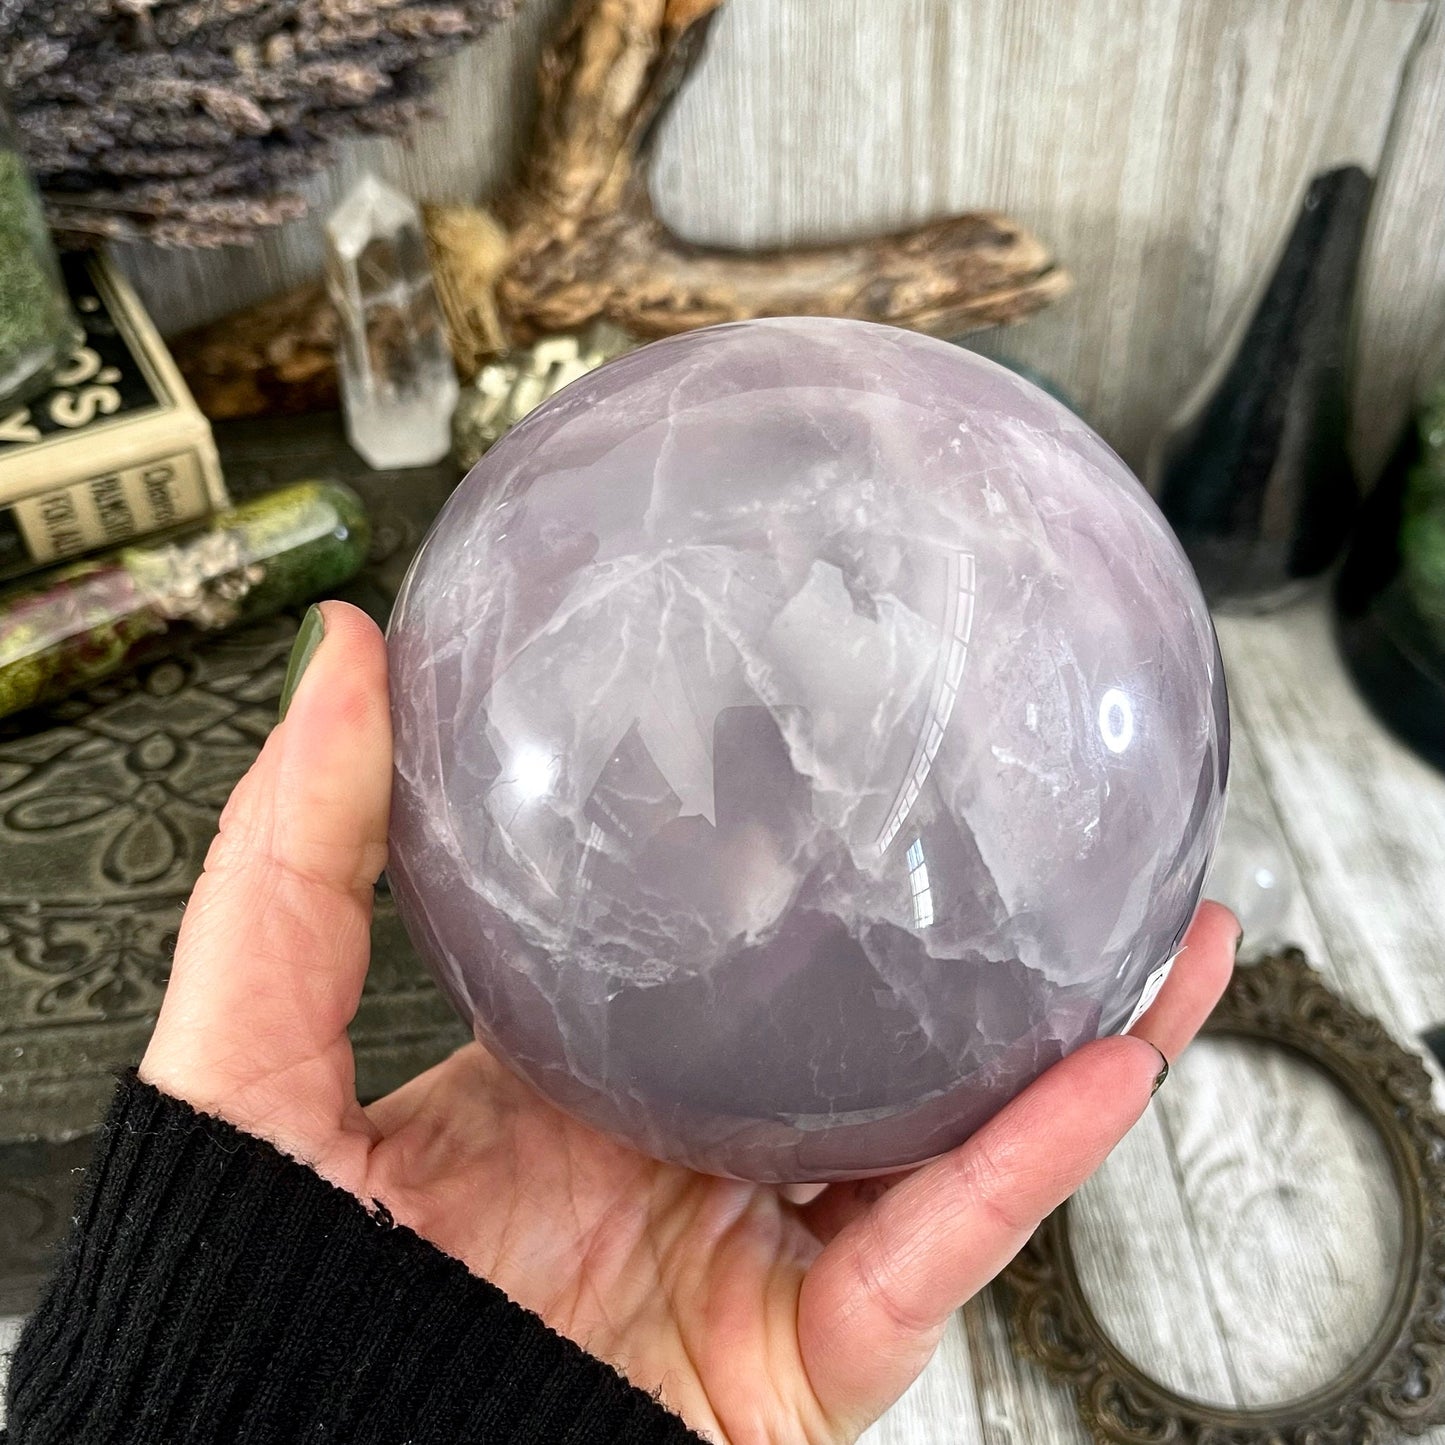 Purple and Green Fluorite Crystal Ball / FoxlarkCrystals / Crystal Sphere Wiccan Pagan Spells Rituals Magic Scrying Orb Metaphysical